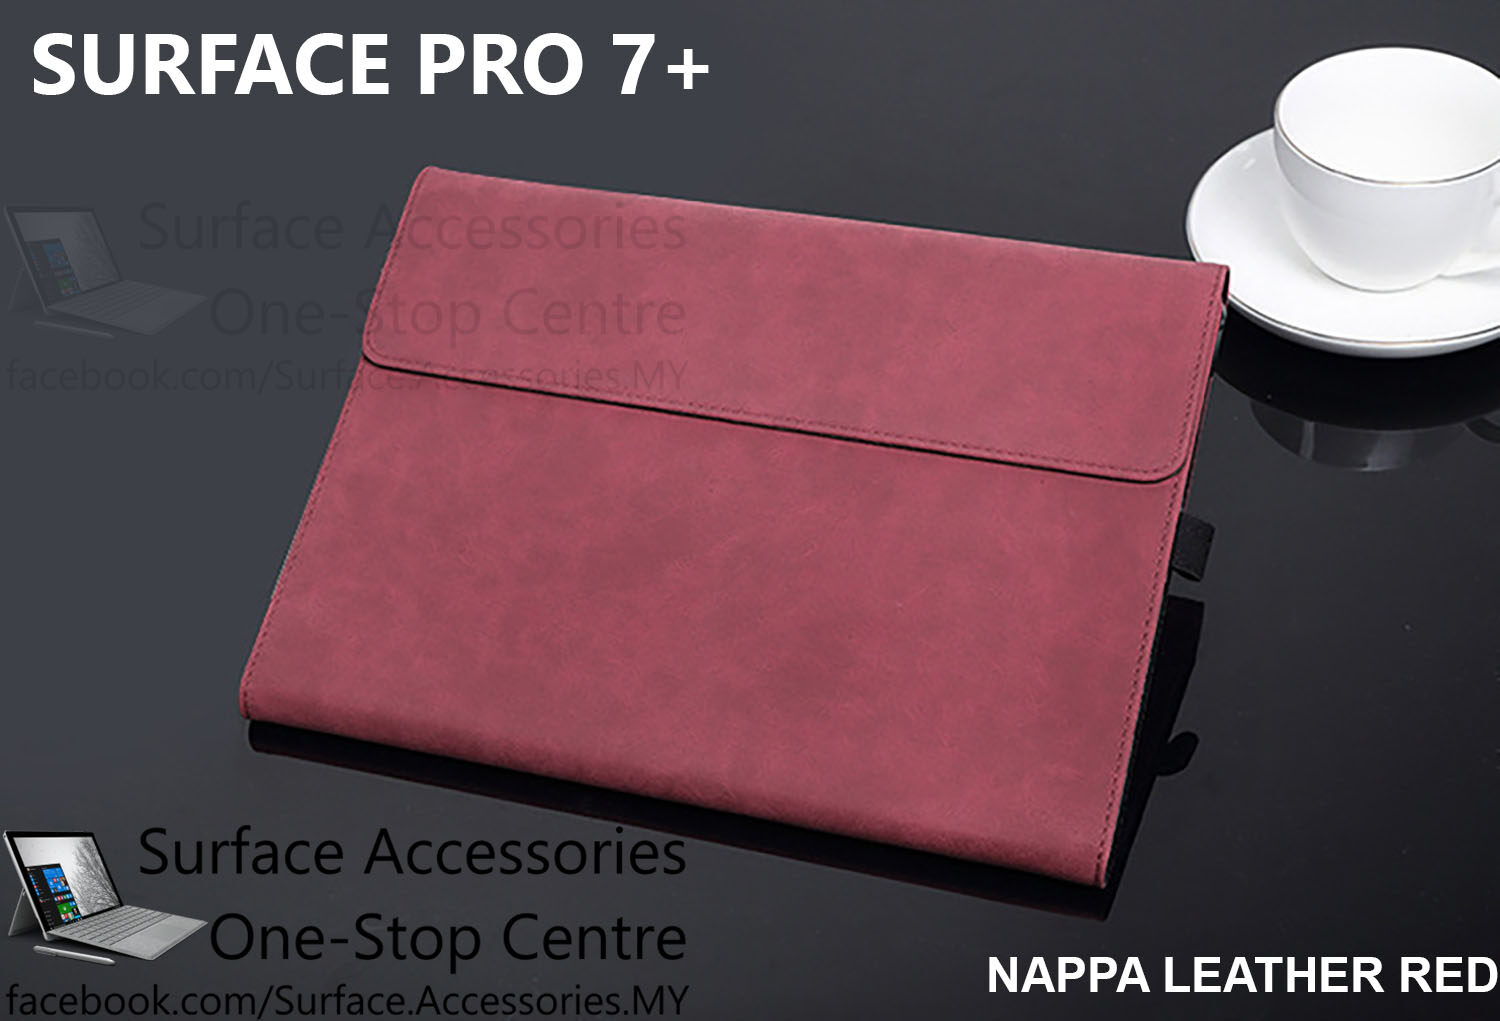 [MALAYSIA]Microsoft Surface Pro 7+ Casing Surface Pro 7+ Cover Premium Ultimate Case Stand Flip Case Microsoft Surface Pro 7 Plus Casing Microsoft Surface Pro 7 Plus Cover